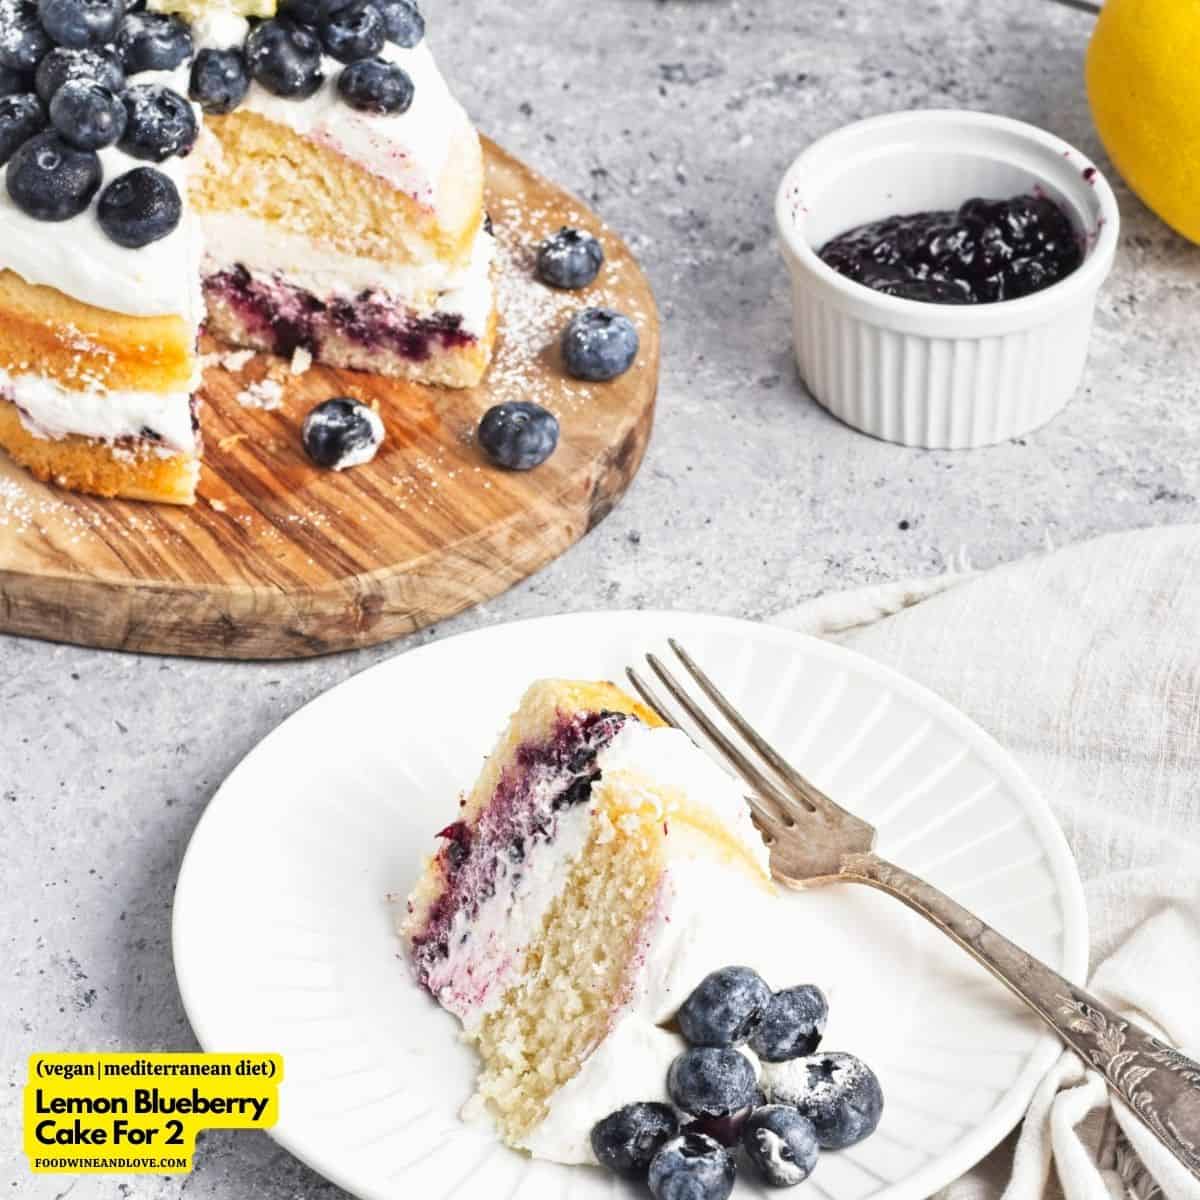 Lemon Blueberry Cake For 2 , a delicious moist and flavorful  dessert recipe made without added dairy. nut free, vegan, small batch.